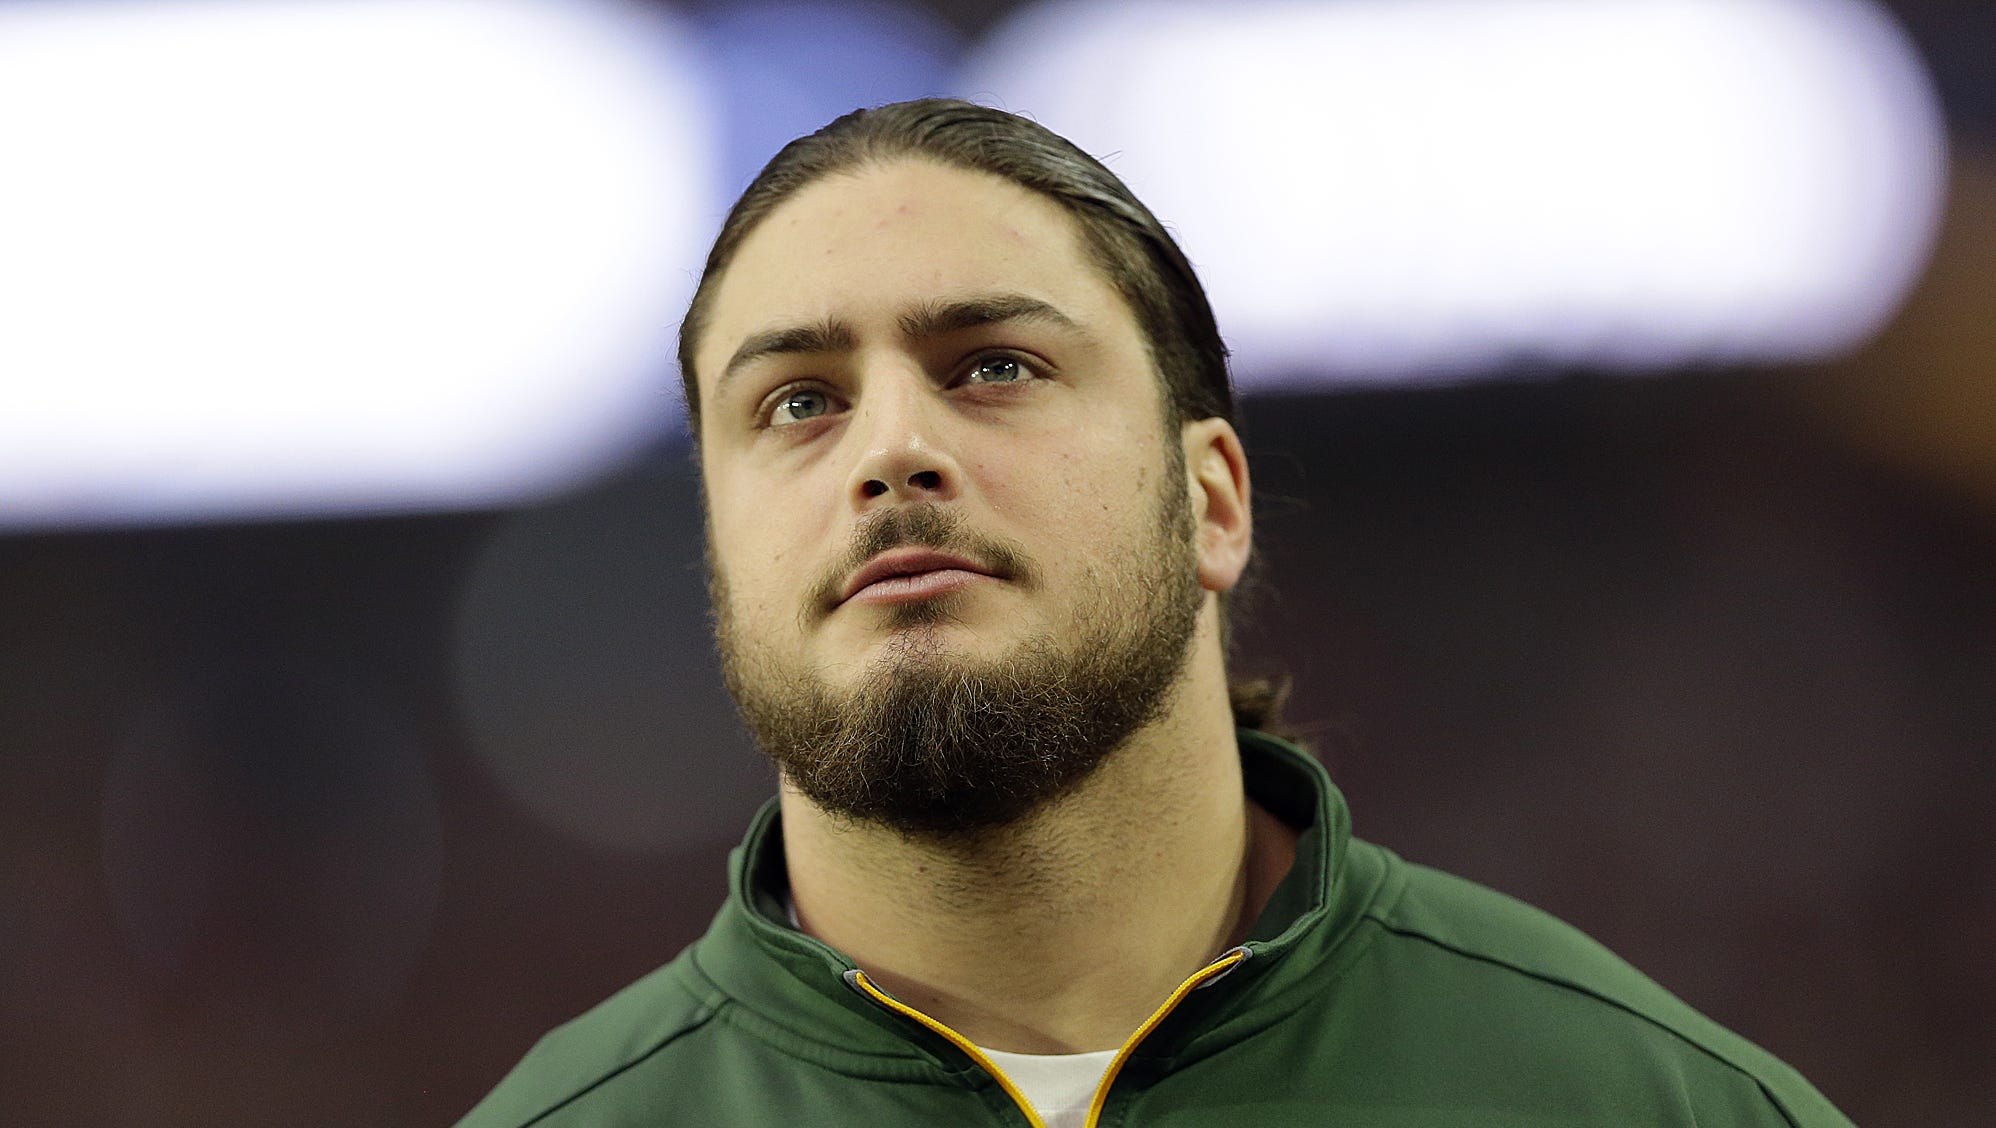 Green Bay Packers tackle David Bakhtiari looks on from the sidelines during a game against the Arizona Cardinals on Dec. 27, 2015, at University of Phoenix Stadium in Glendale, Ariz.